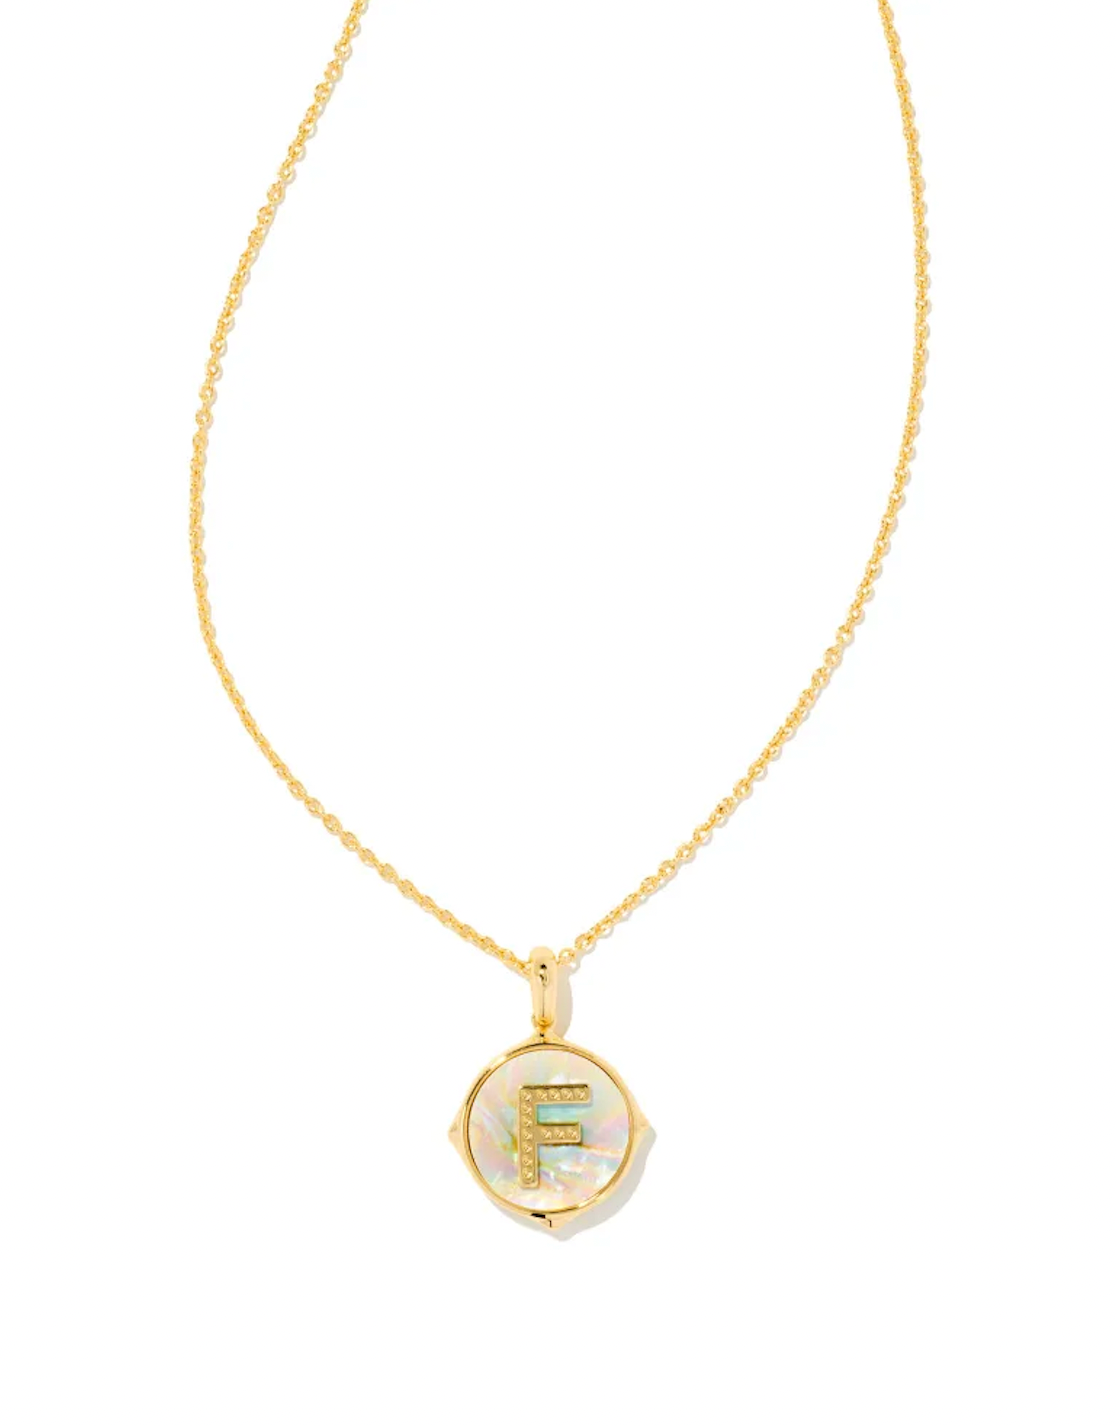 KENDRA SCOTT LETTER F DISC PENDENT NECKLACE GOLD IRIDESCENT ABOLONE